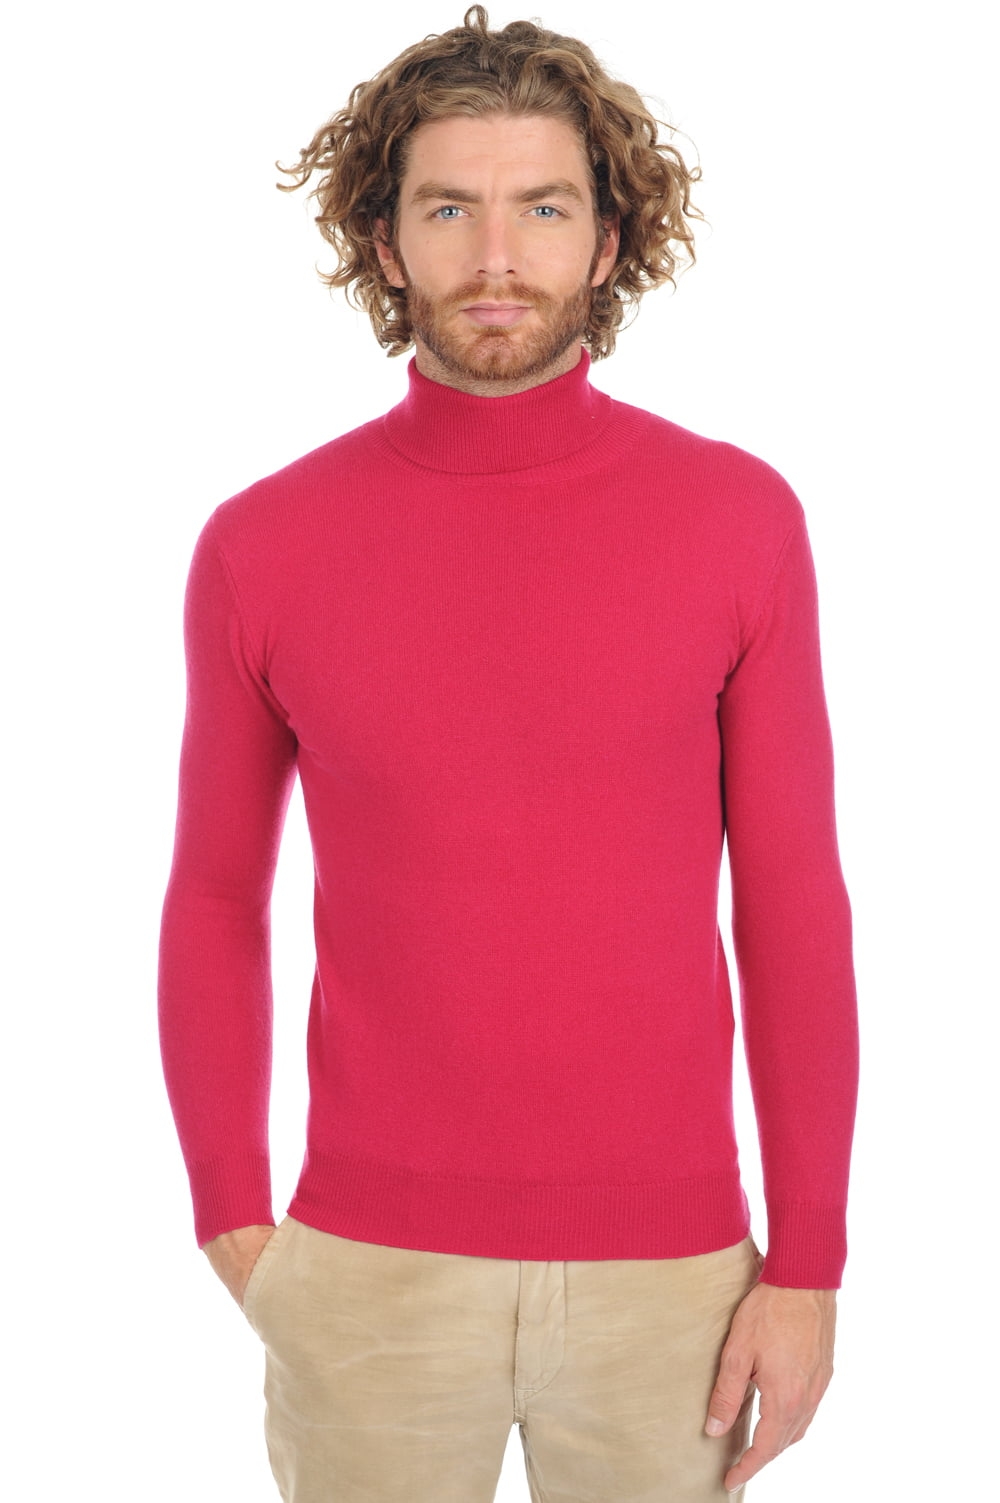 Cashmere men low prices tarry first red fuschsia l